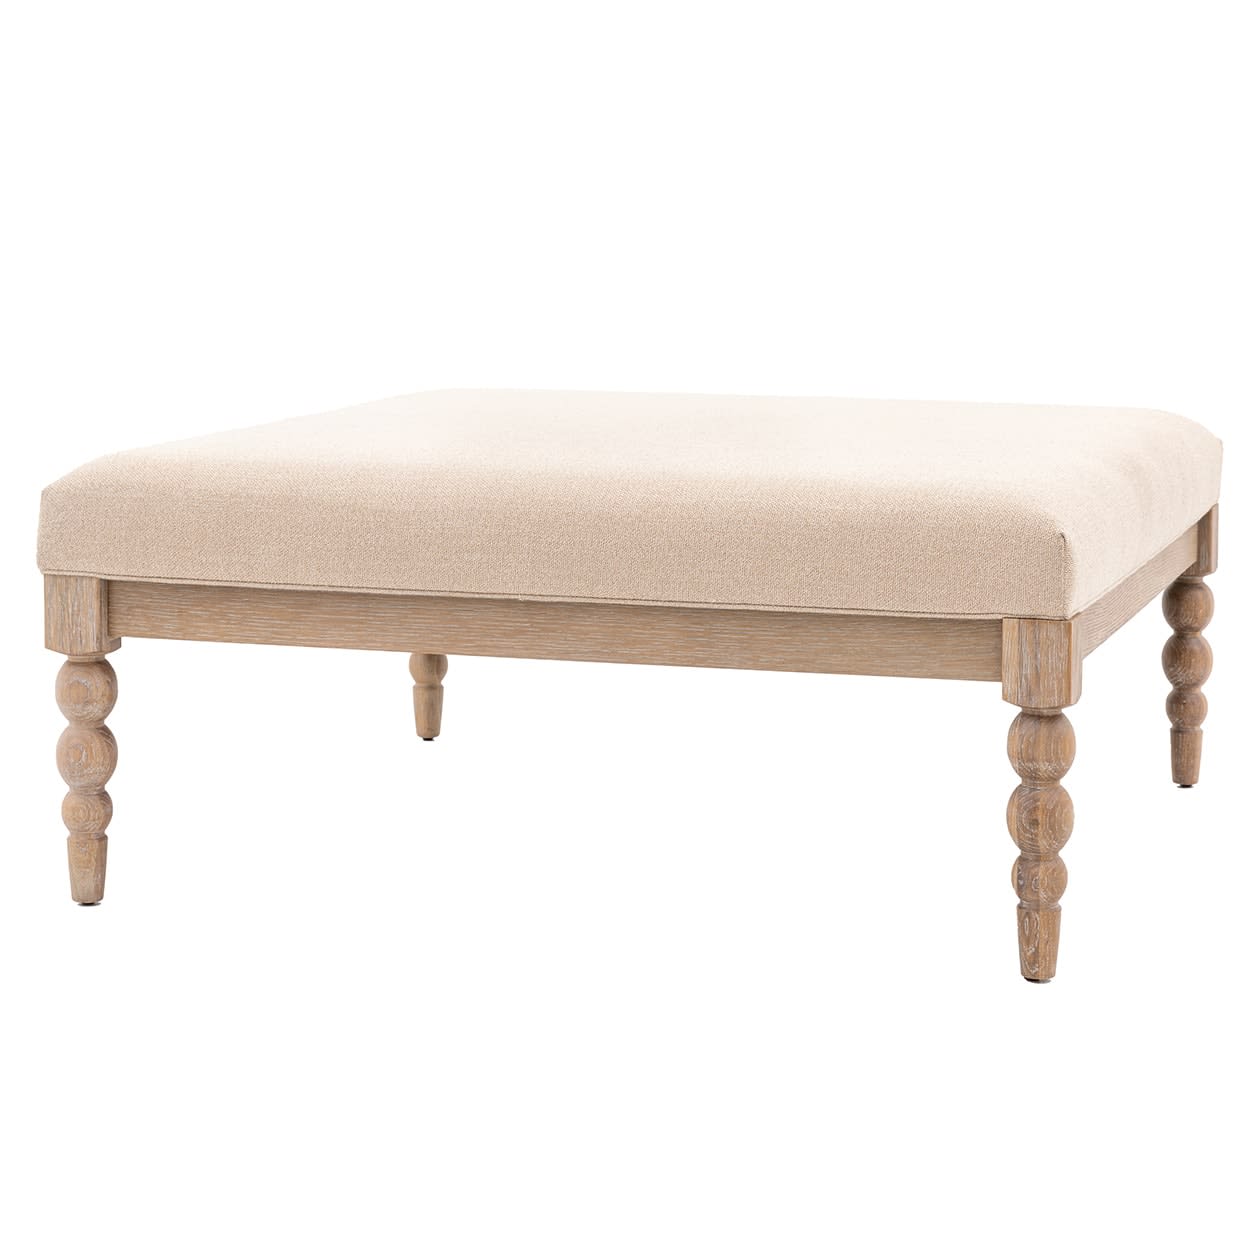 Artisan Wooden and Linen Coffee Table by Gallery Direct